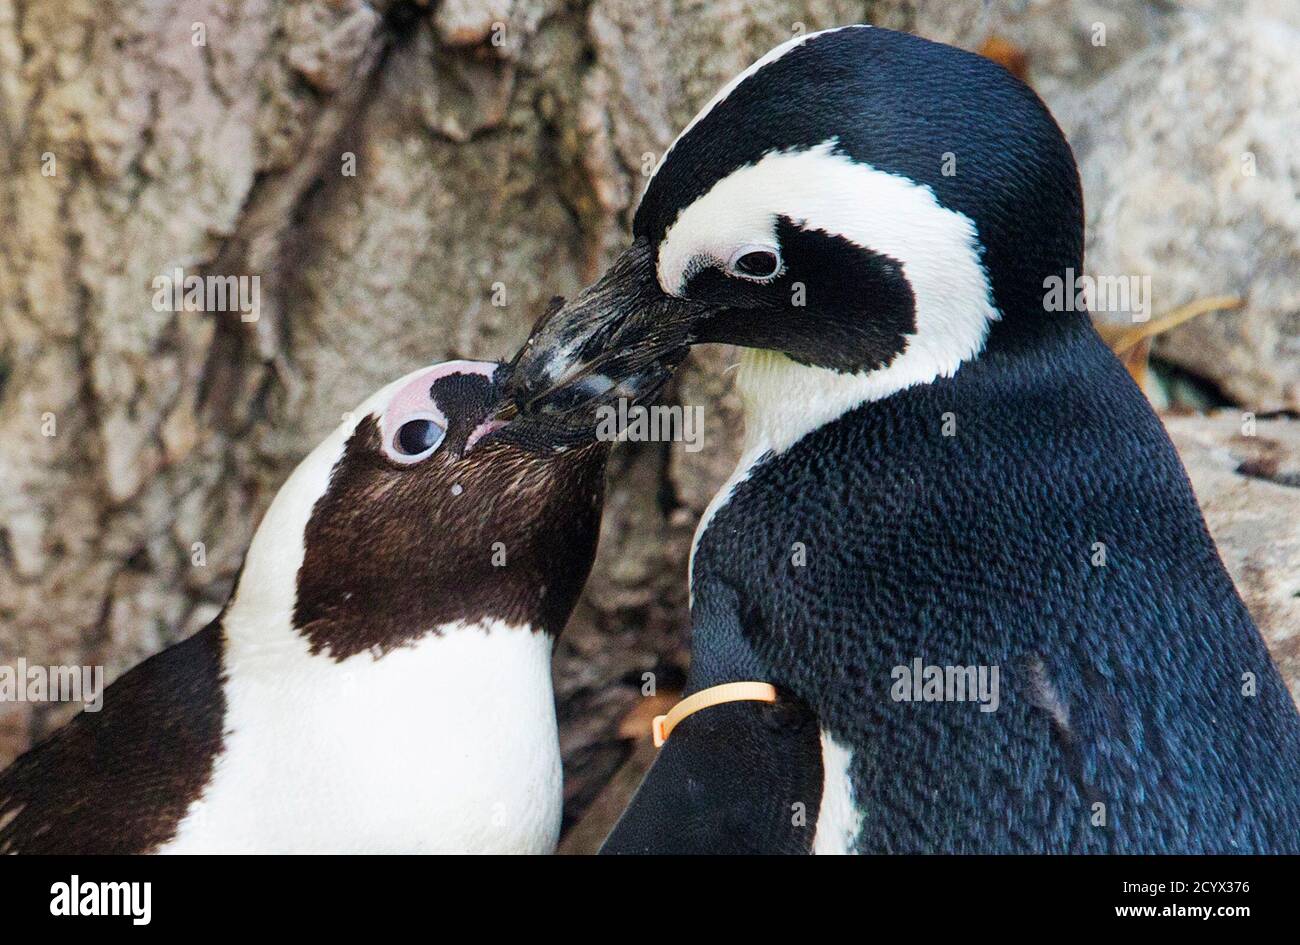 African penguins Pedro (R) and Buddy interact with each other at the  Toronto Zoo in Toronto November 8, 2011. The Toronto Zoo announced they  will separate the penguins after zookeepers noticed behaviour